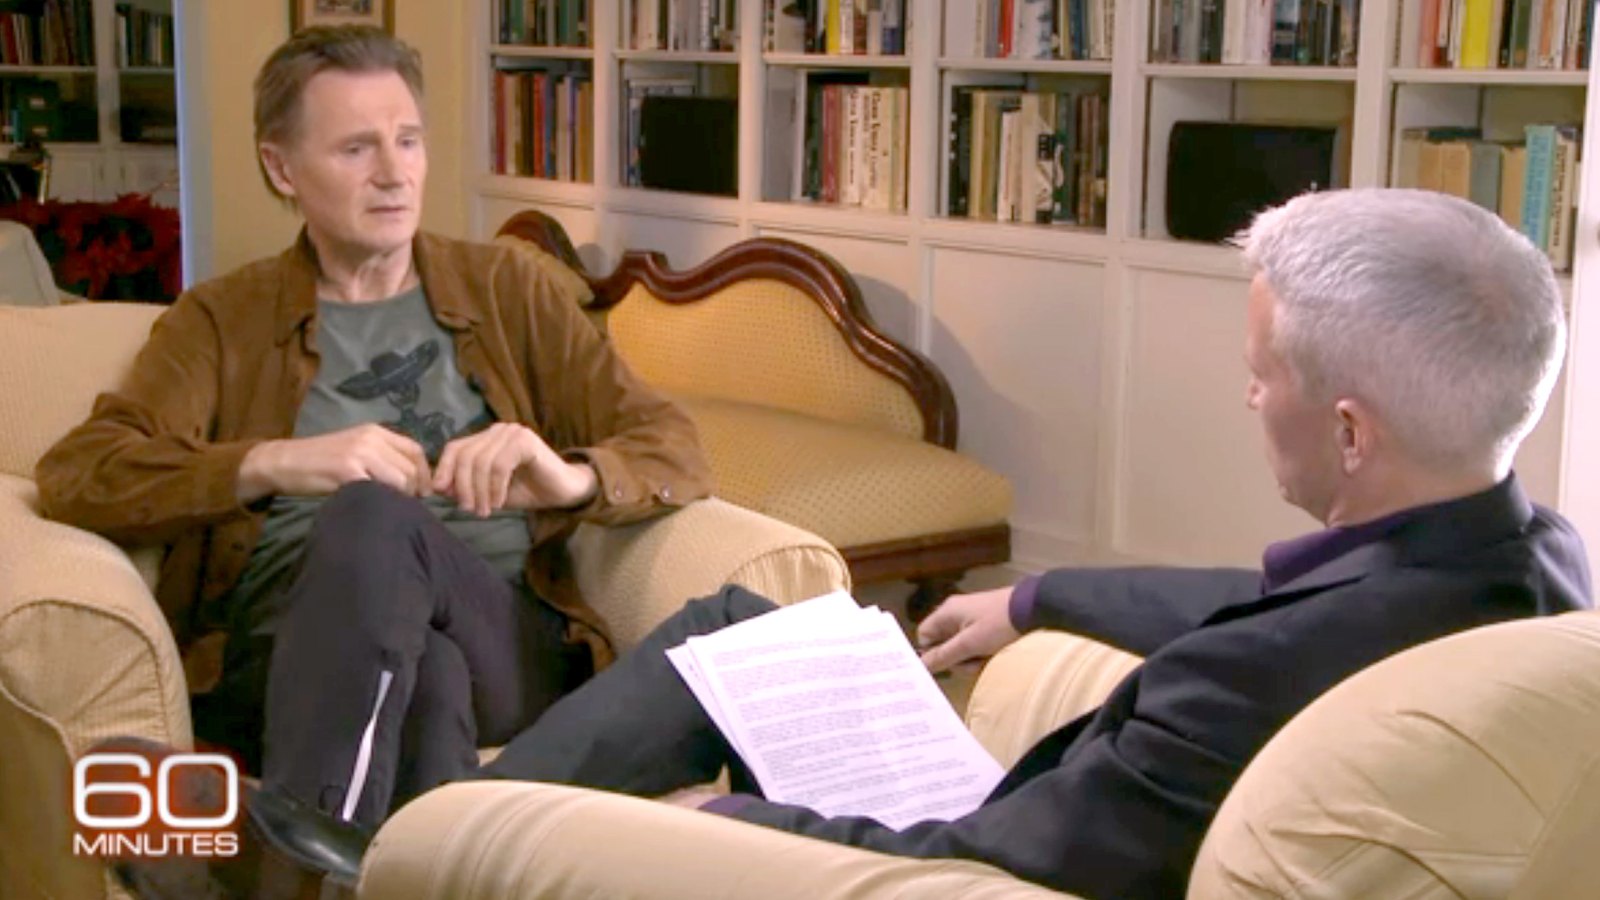 Liam Neeson during an interview with Anderson Cooper for 60 Minutes